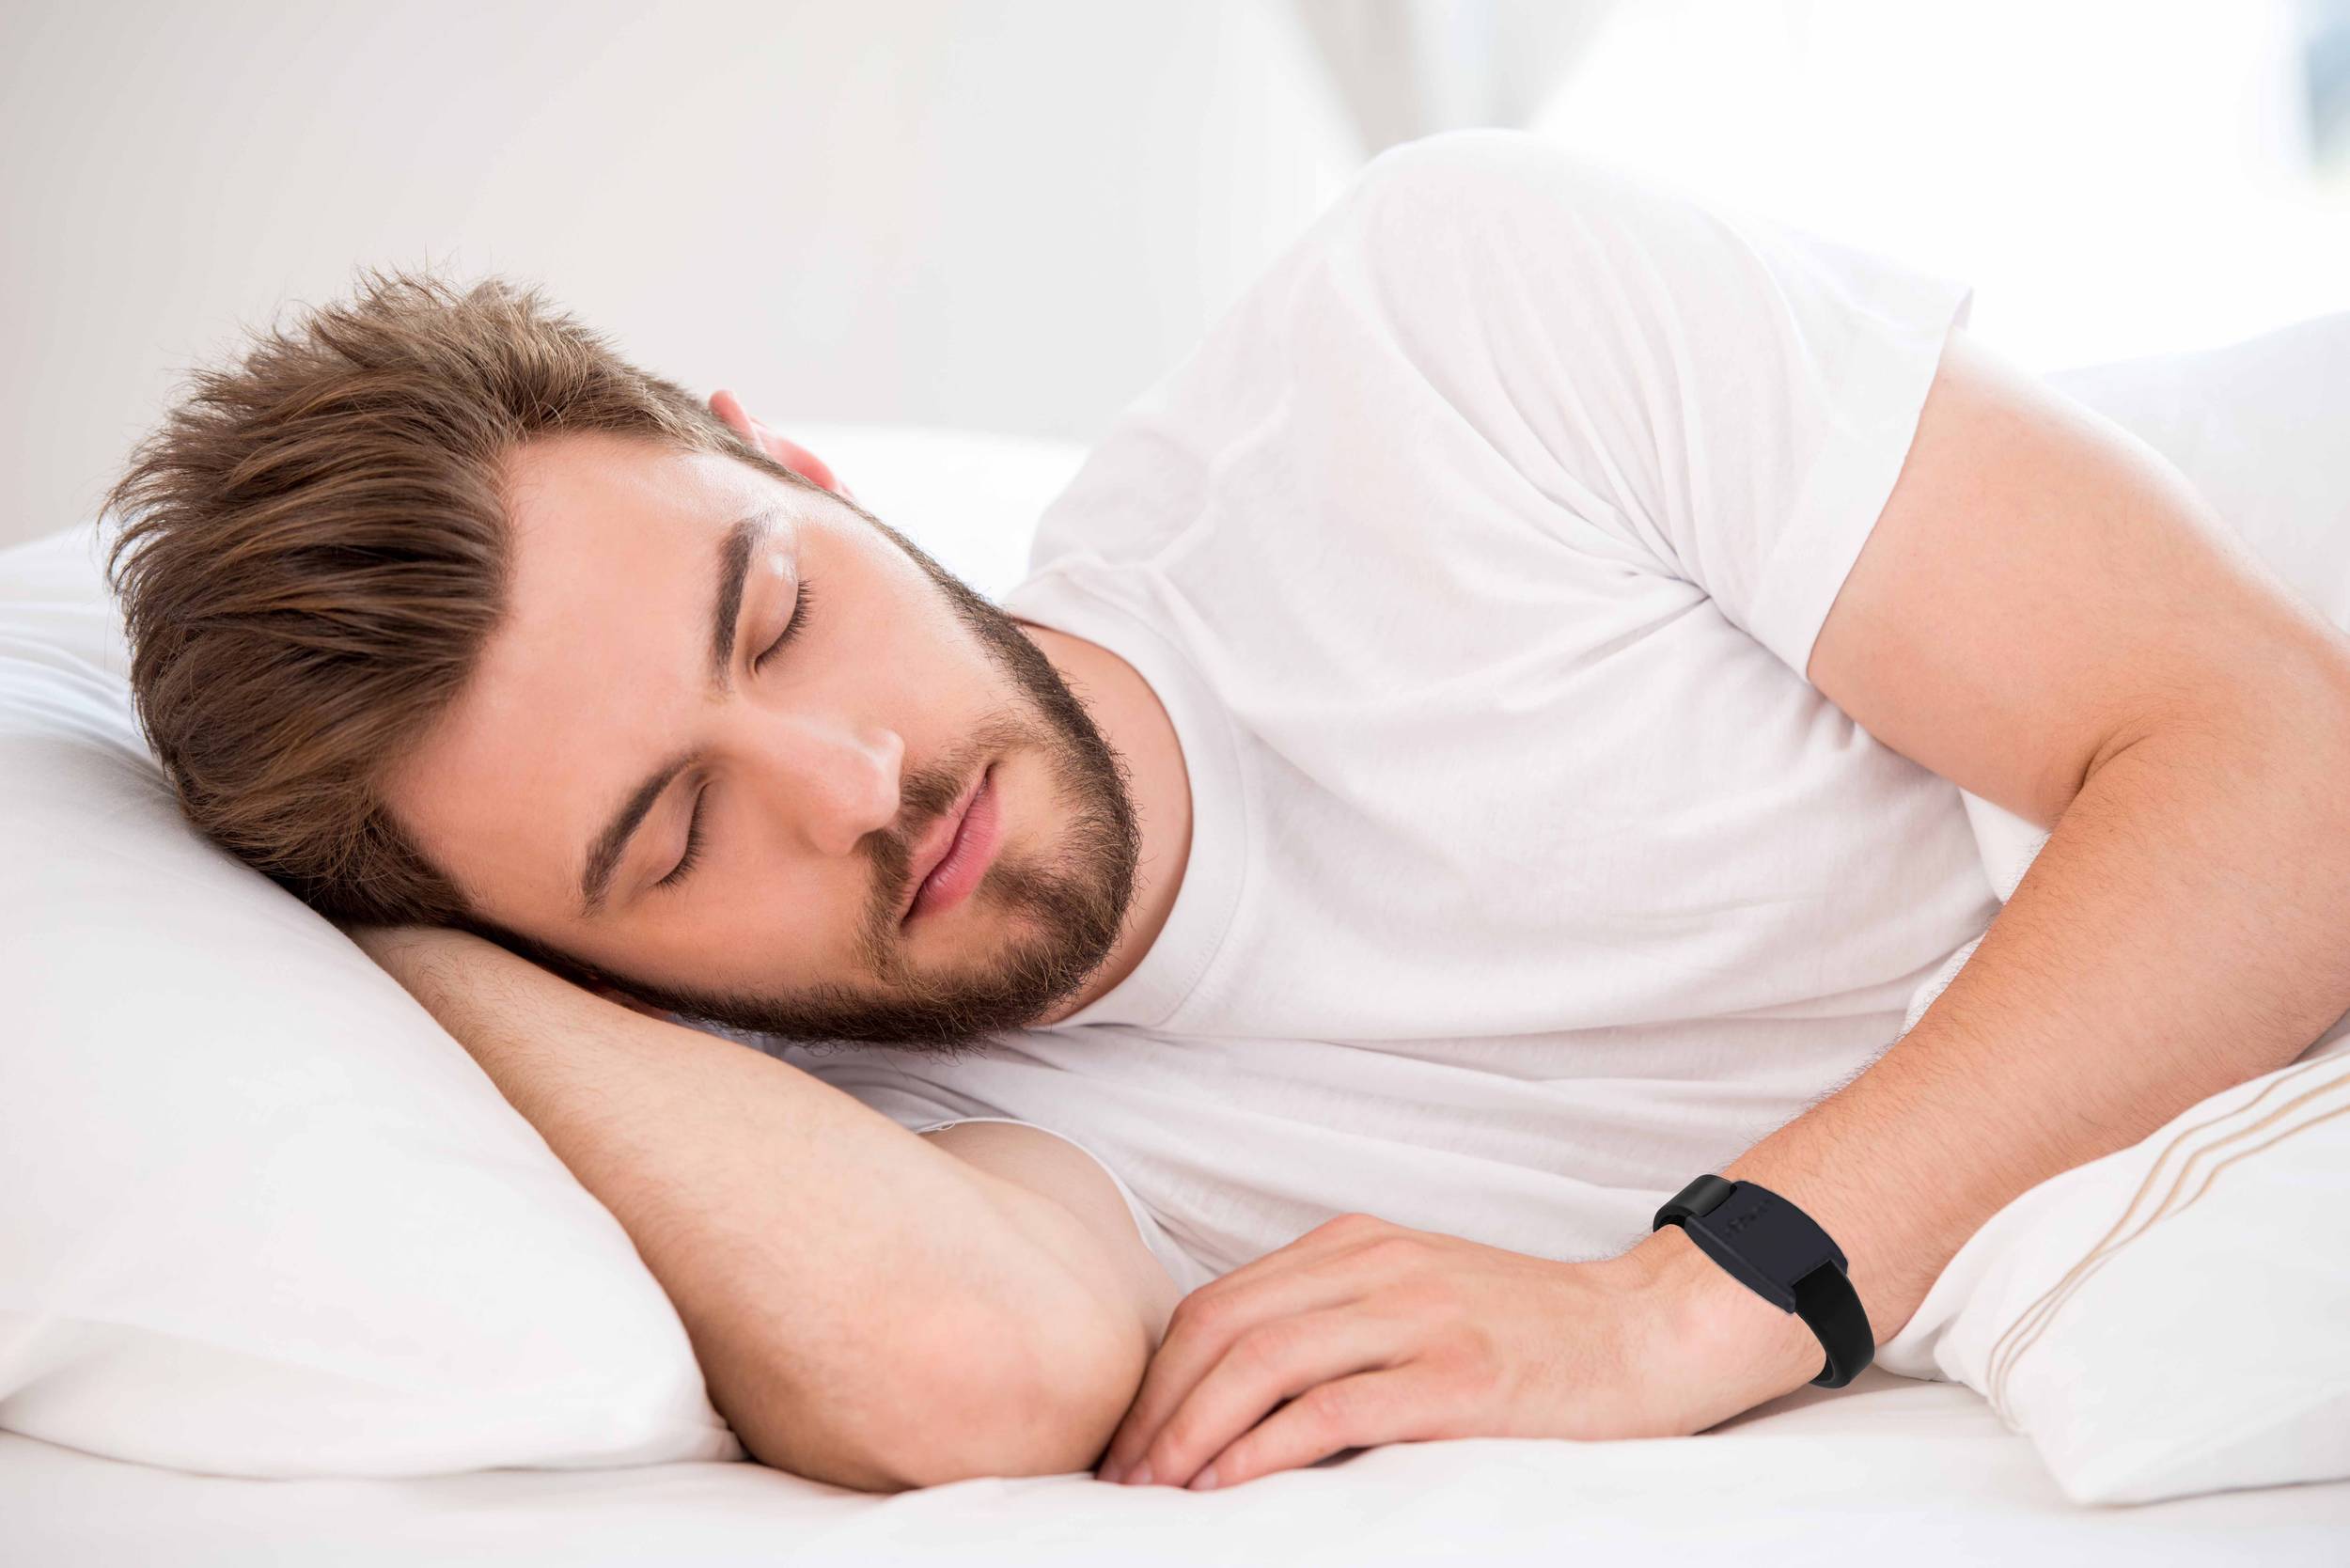 A man in deep sleep on a white bed with a watch on his wrist.